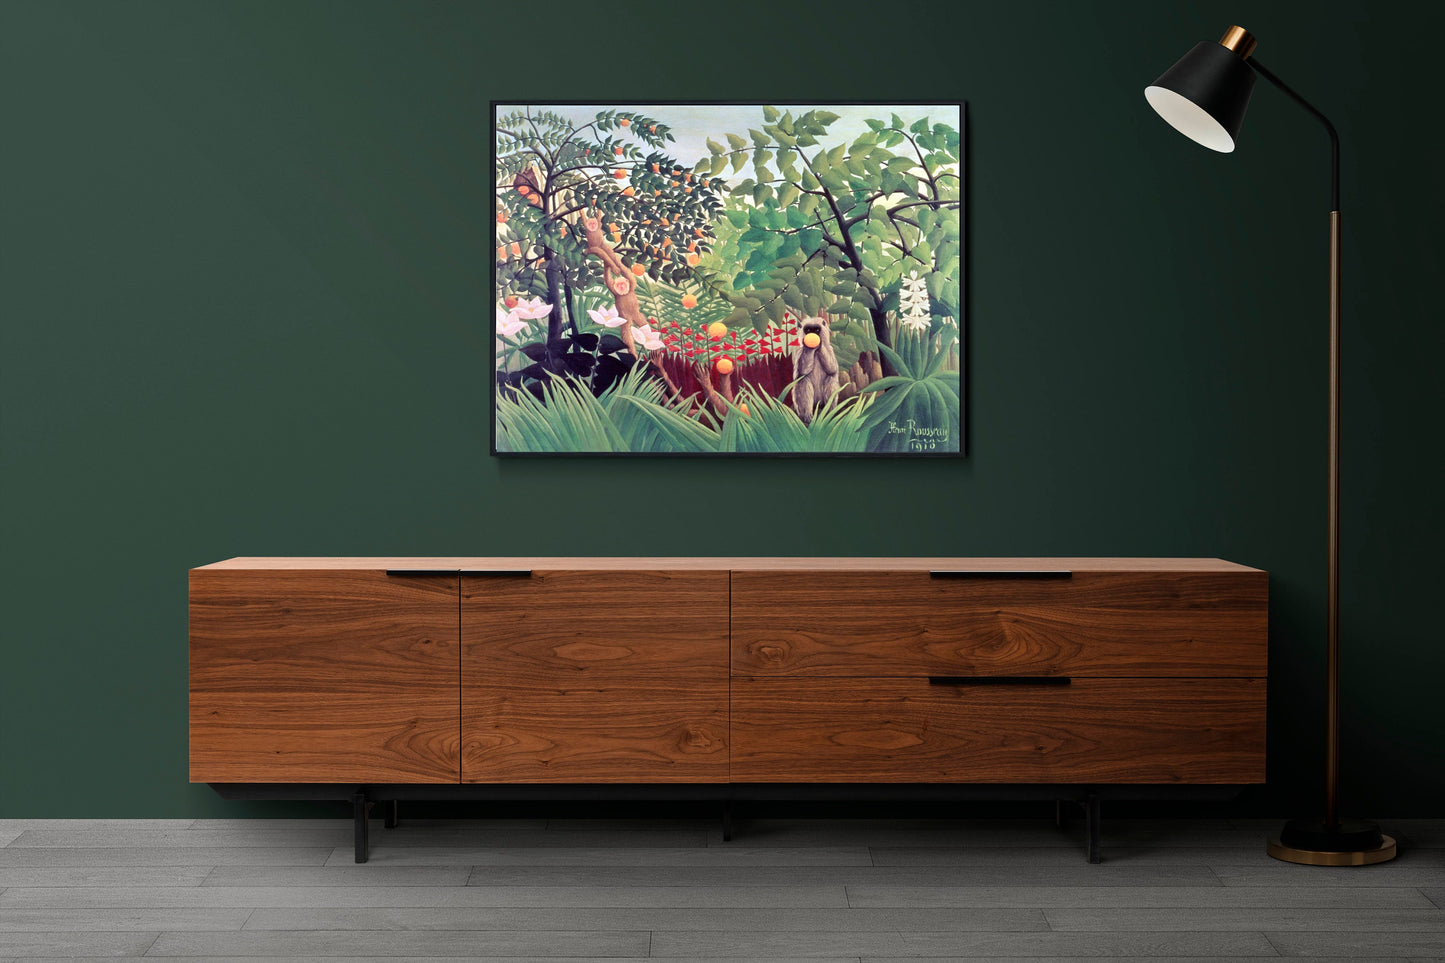 Exotic Landscape by Henri Rousseau Poster Illustration Print Wall Hanging Decor A4 A3 A2